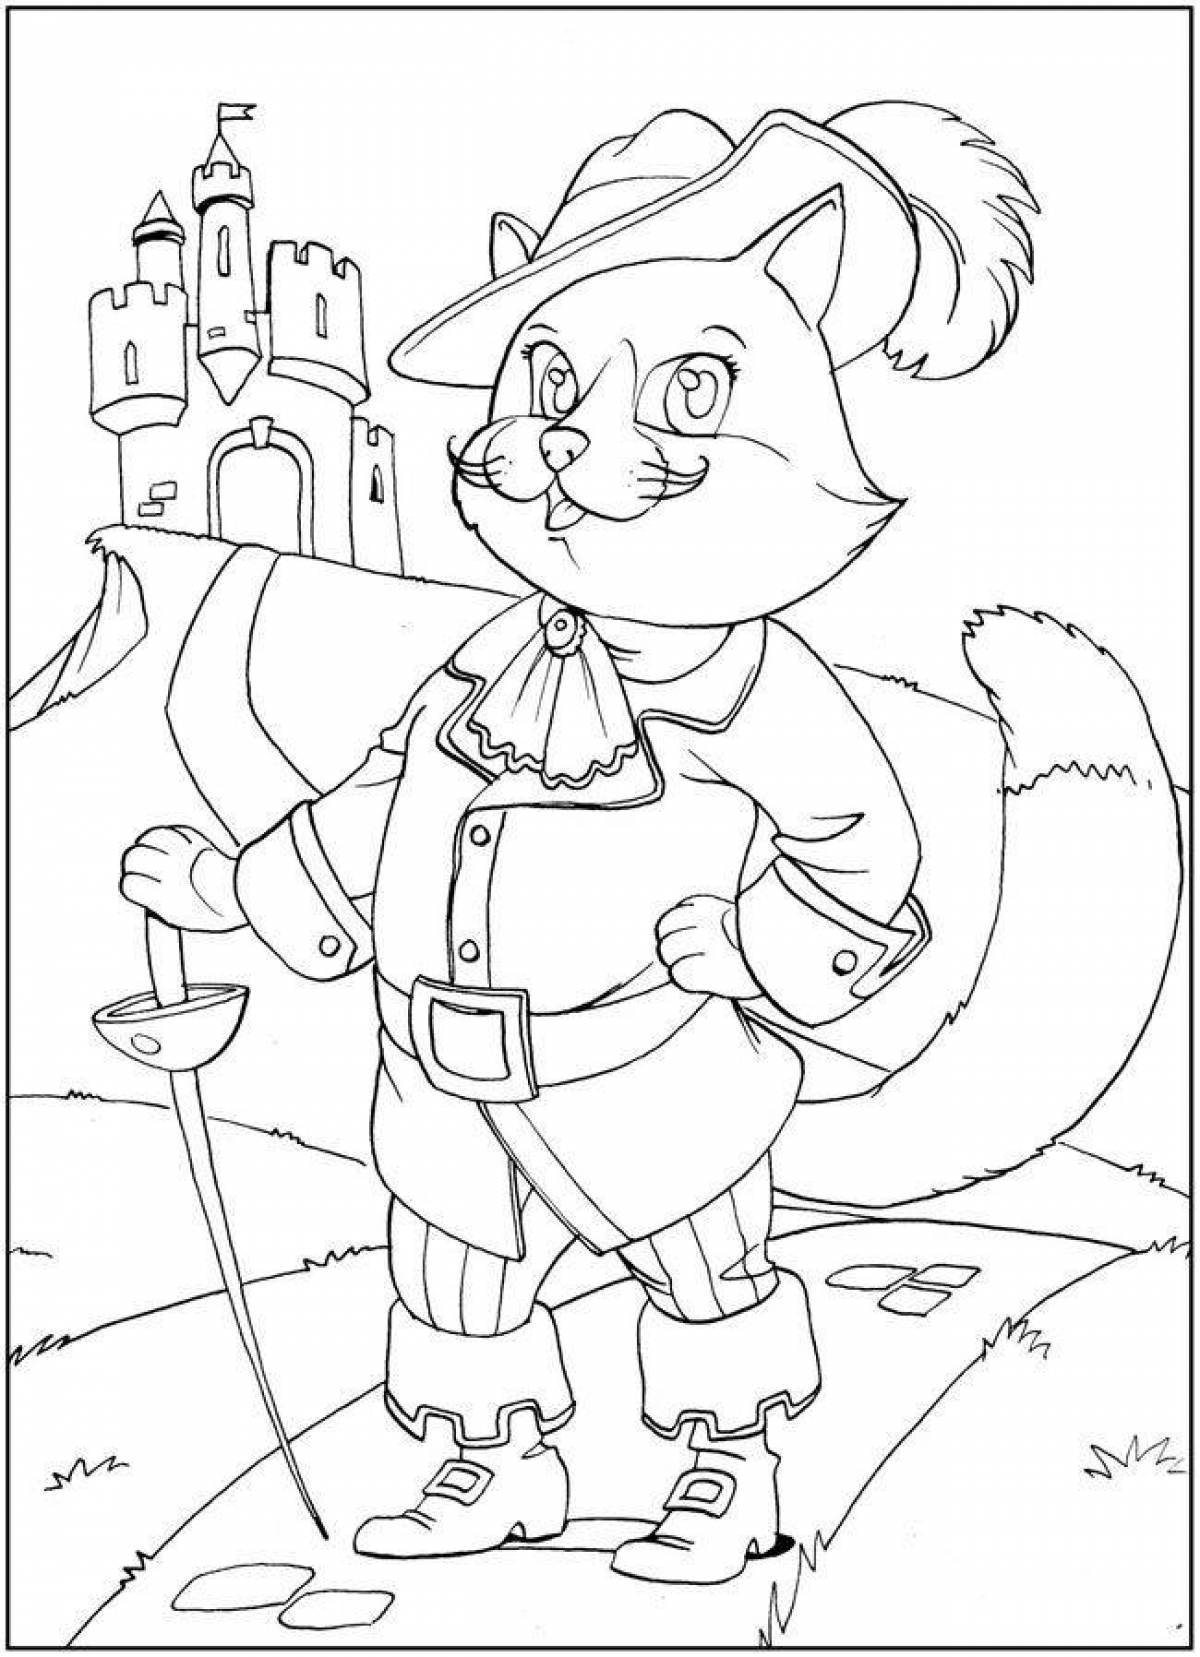 Creative puss in boots coloring for kids